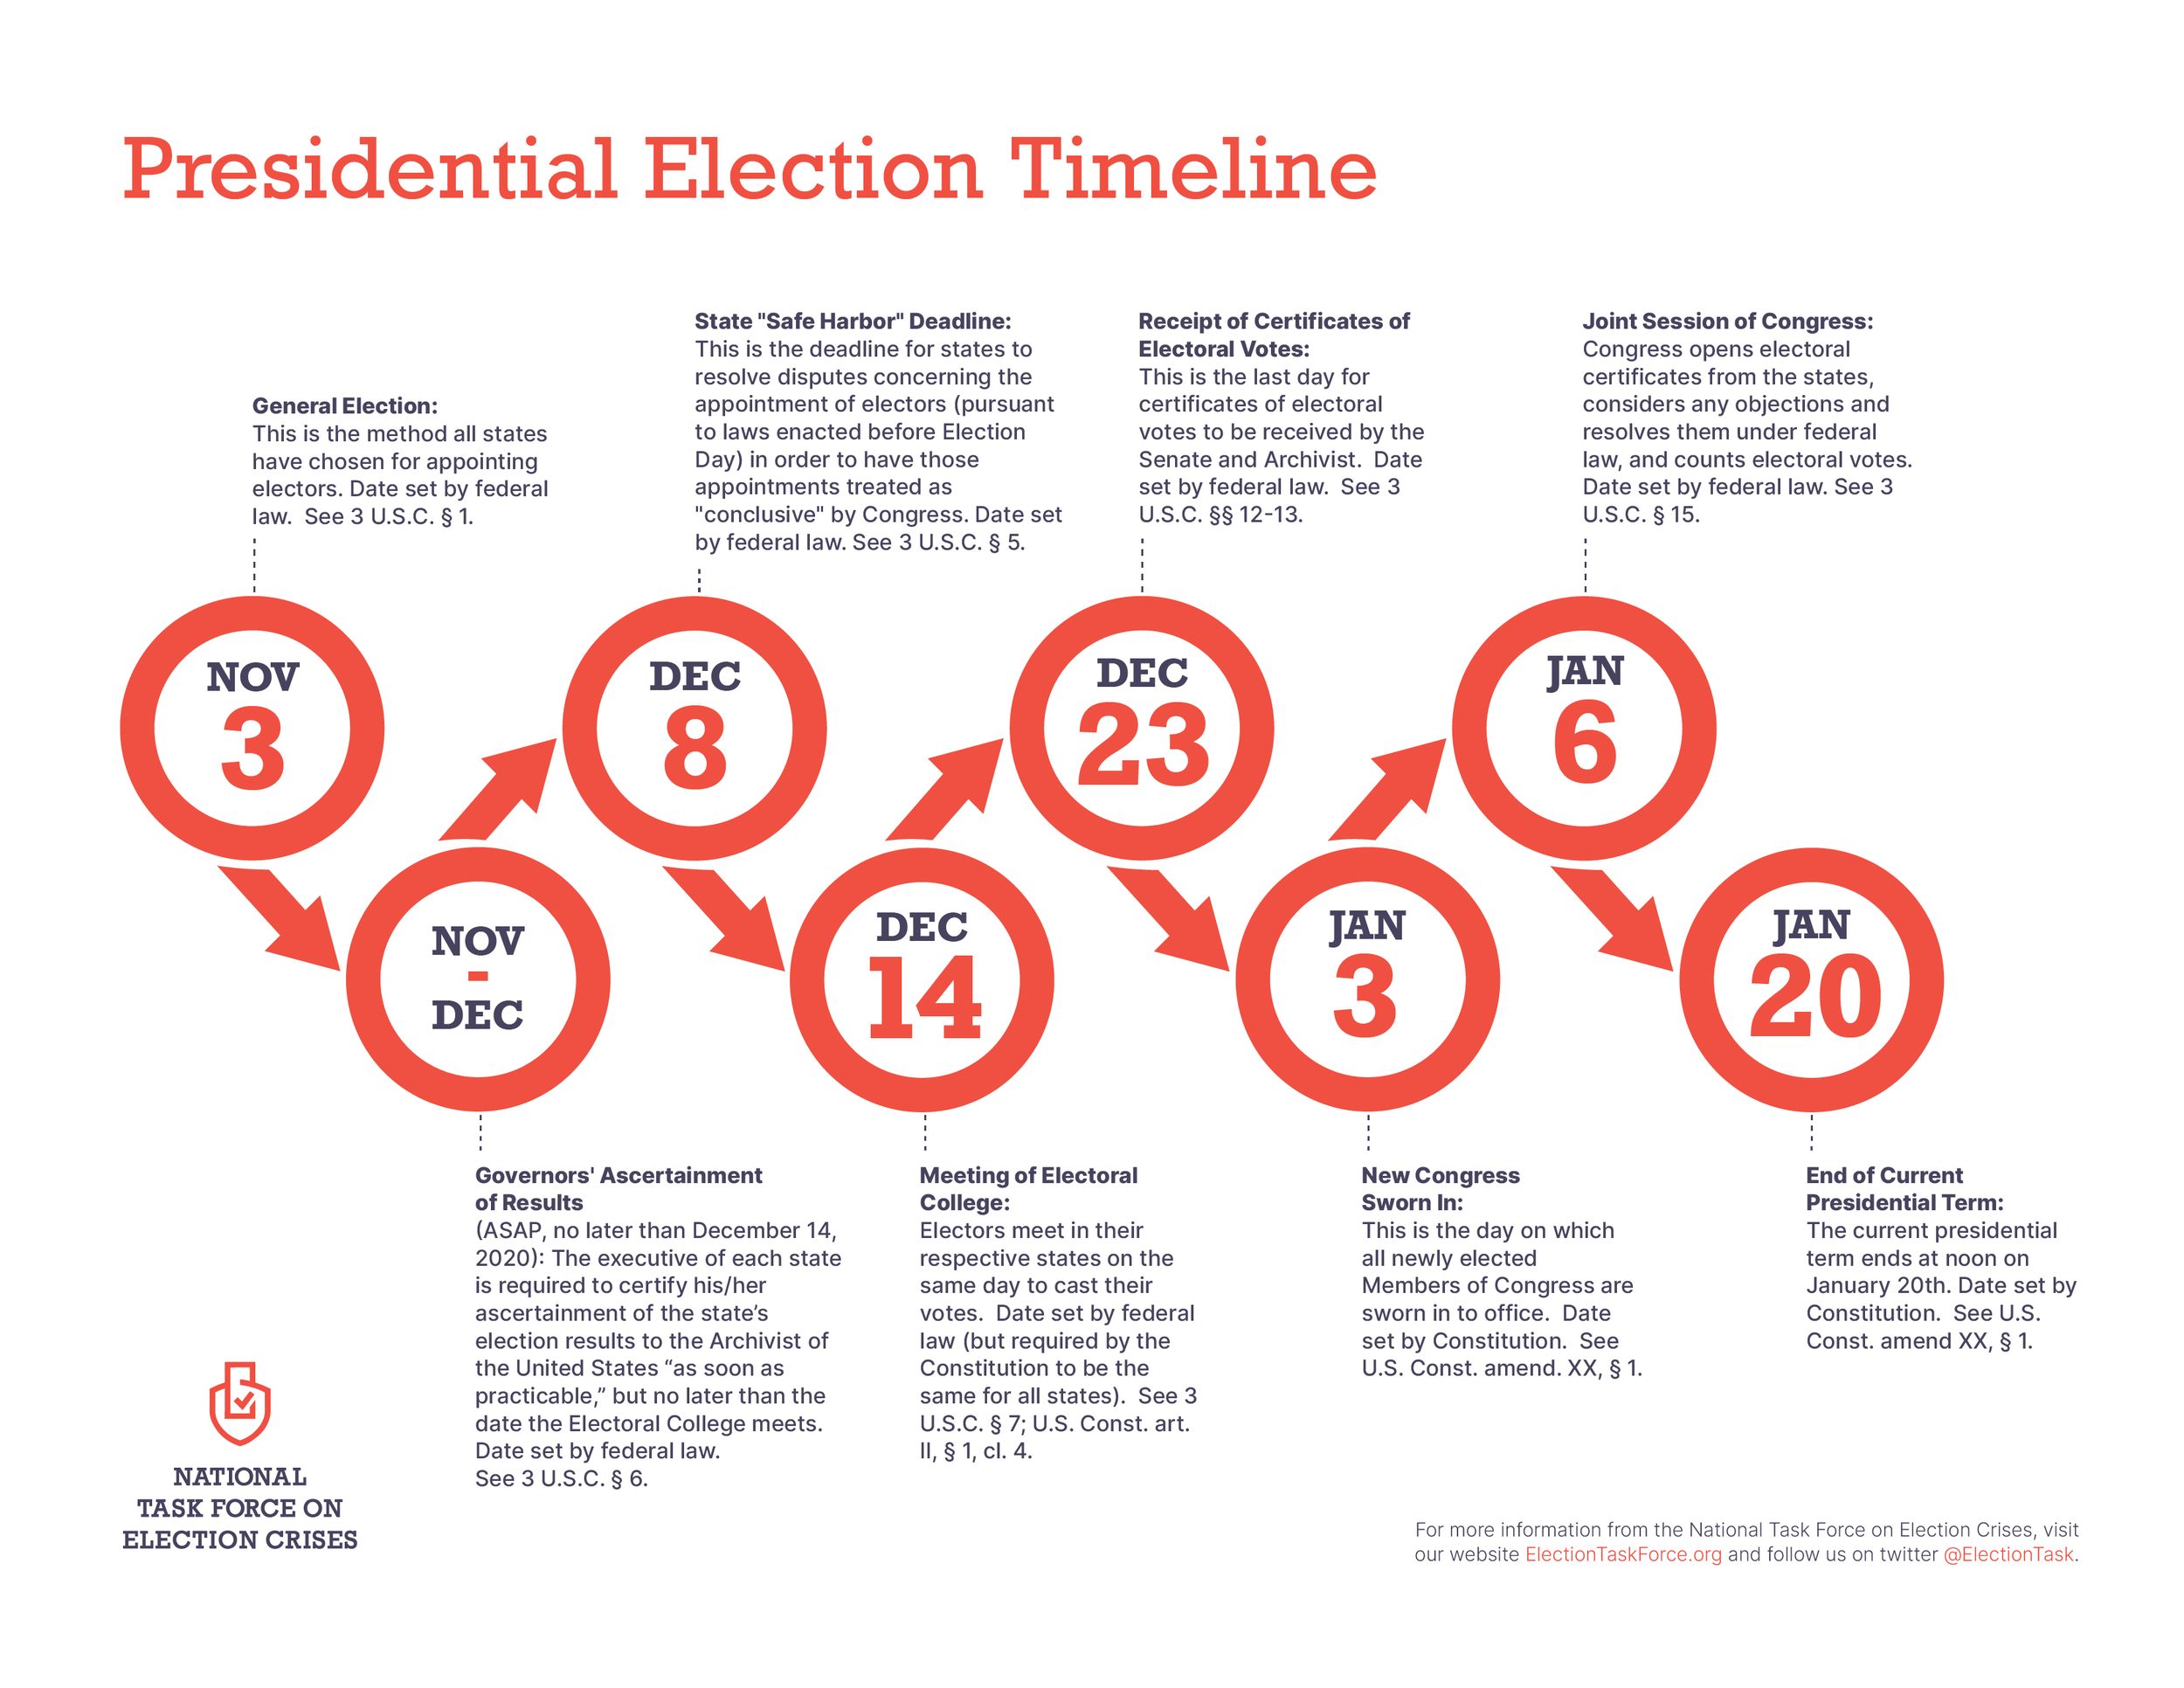 Presidential Elections Process